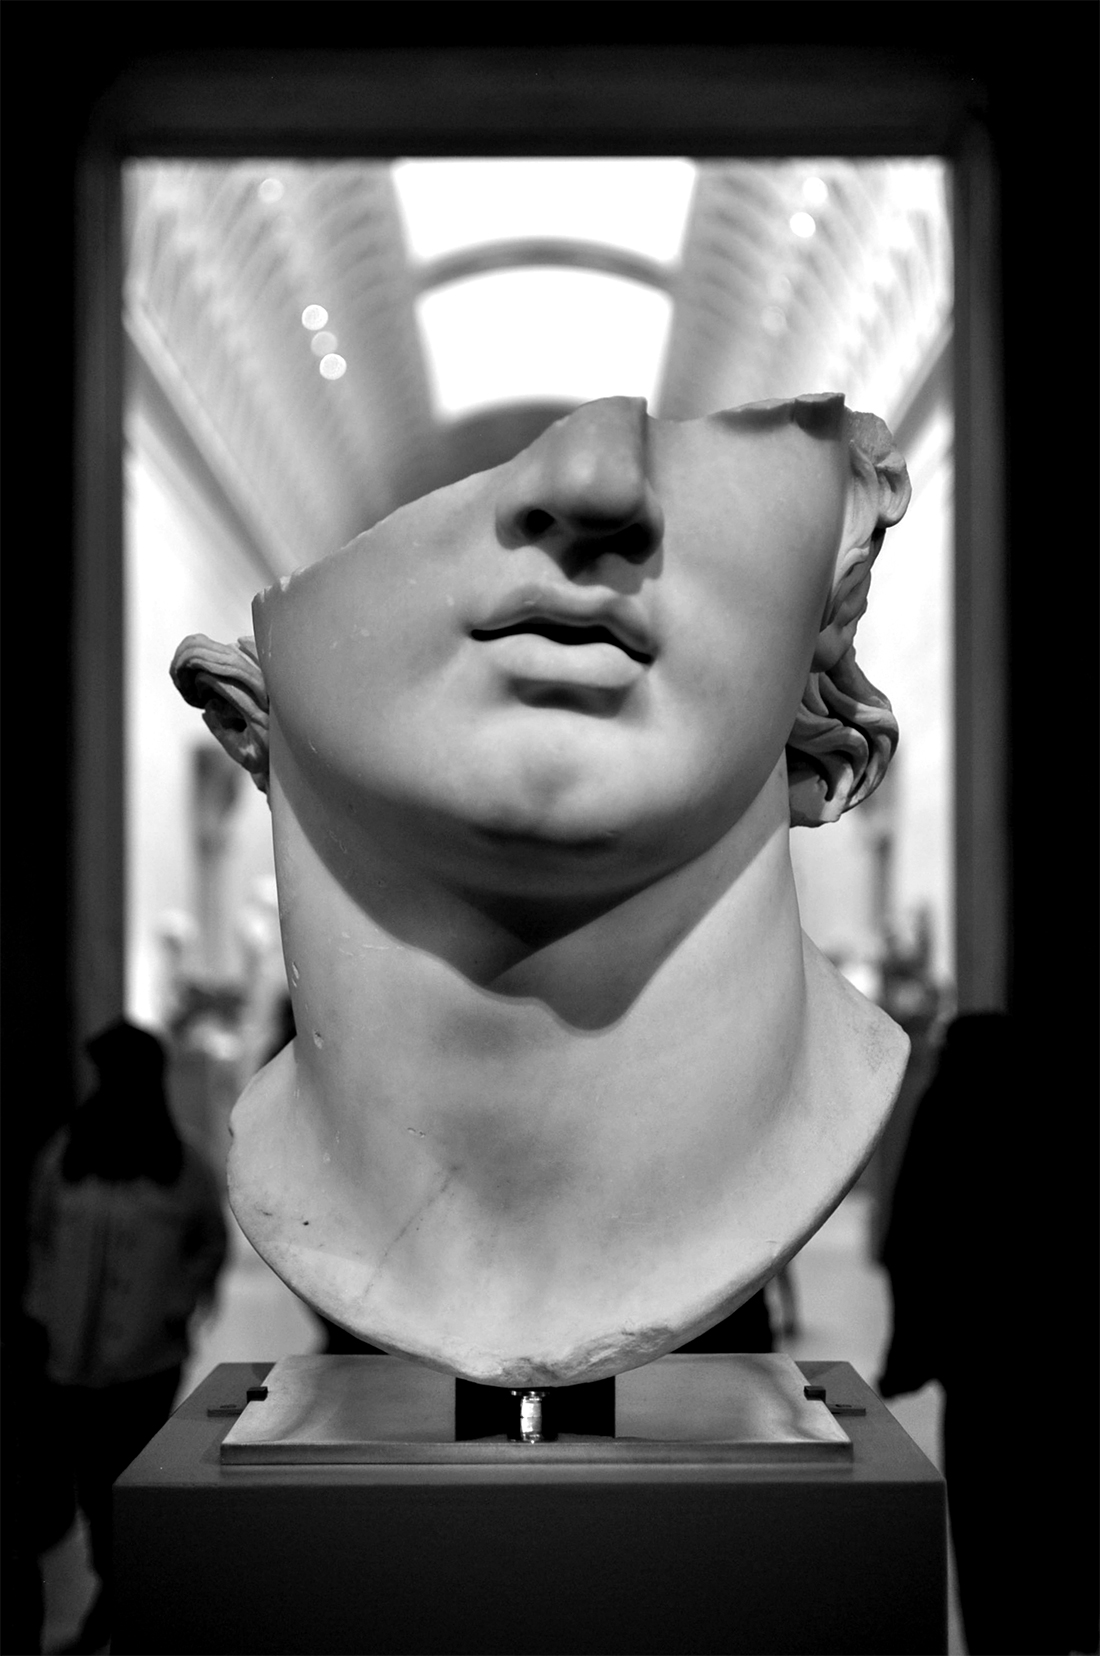 Fragmentary colossal head of a youth, from The Metropolitan Museum of Art